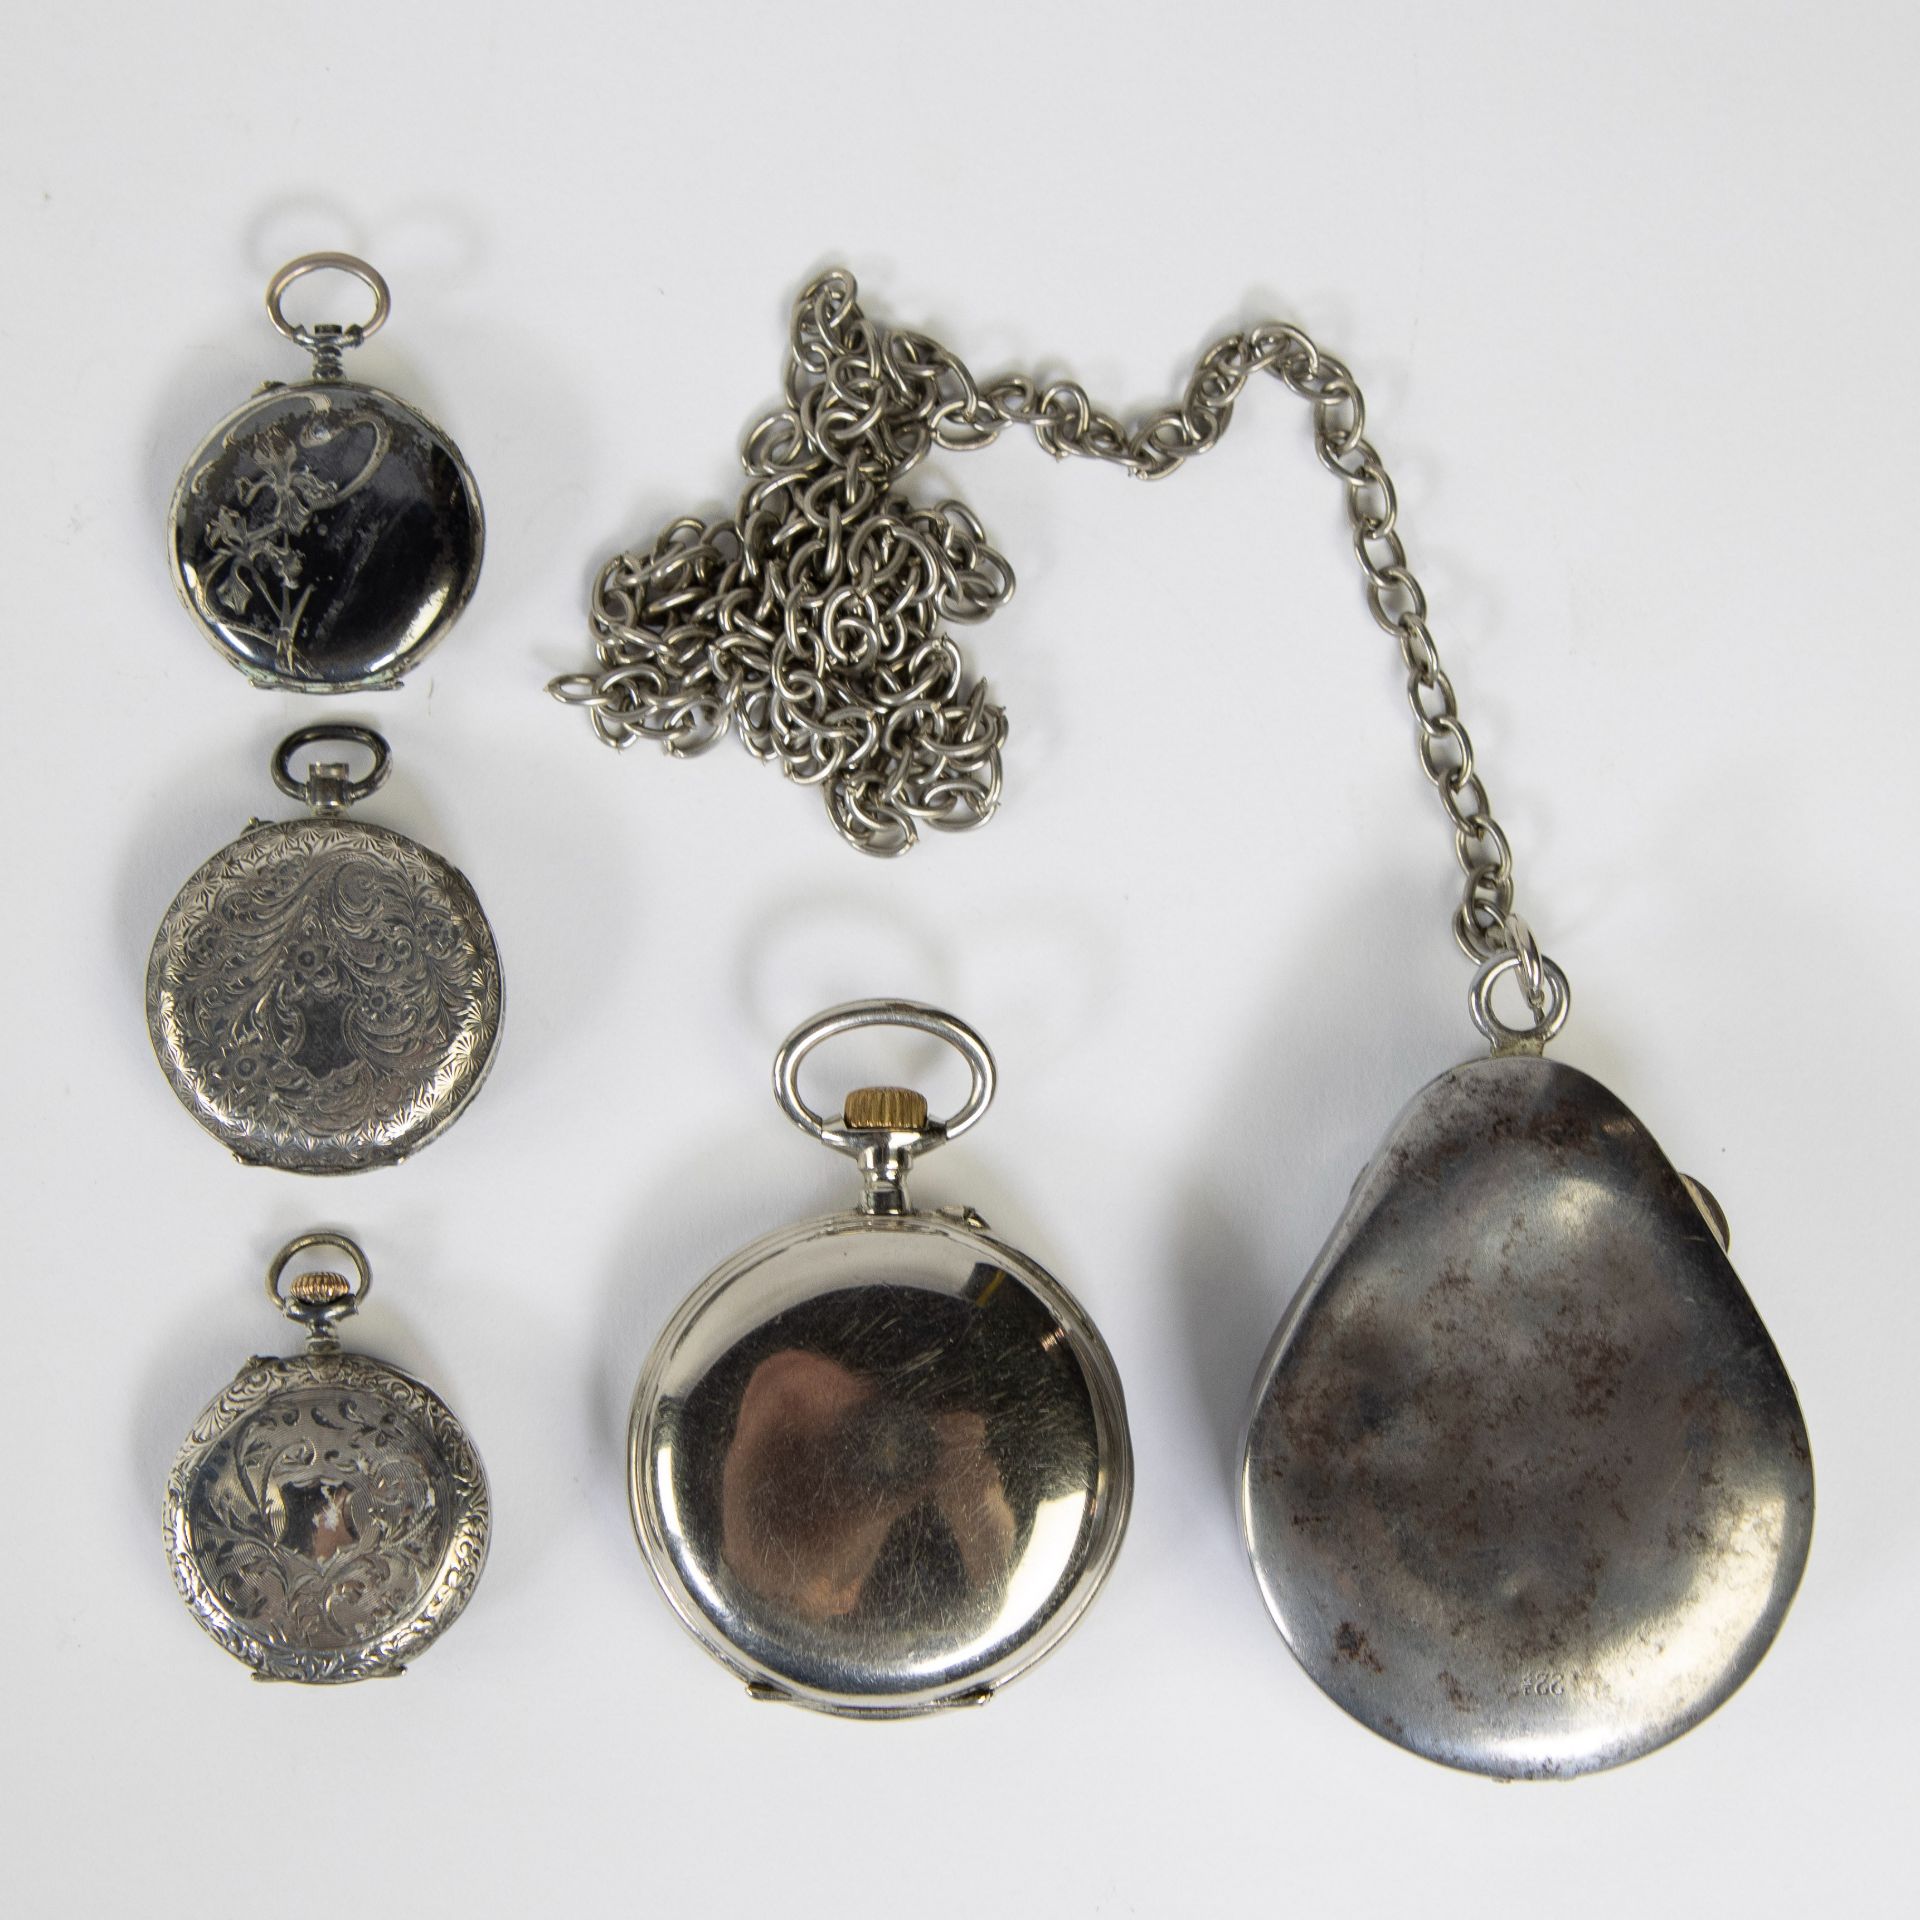 4 pocket watches, 3 of which are silver - Image 2 of 2